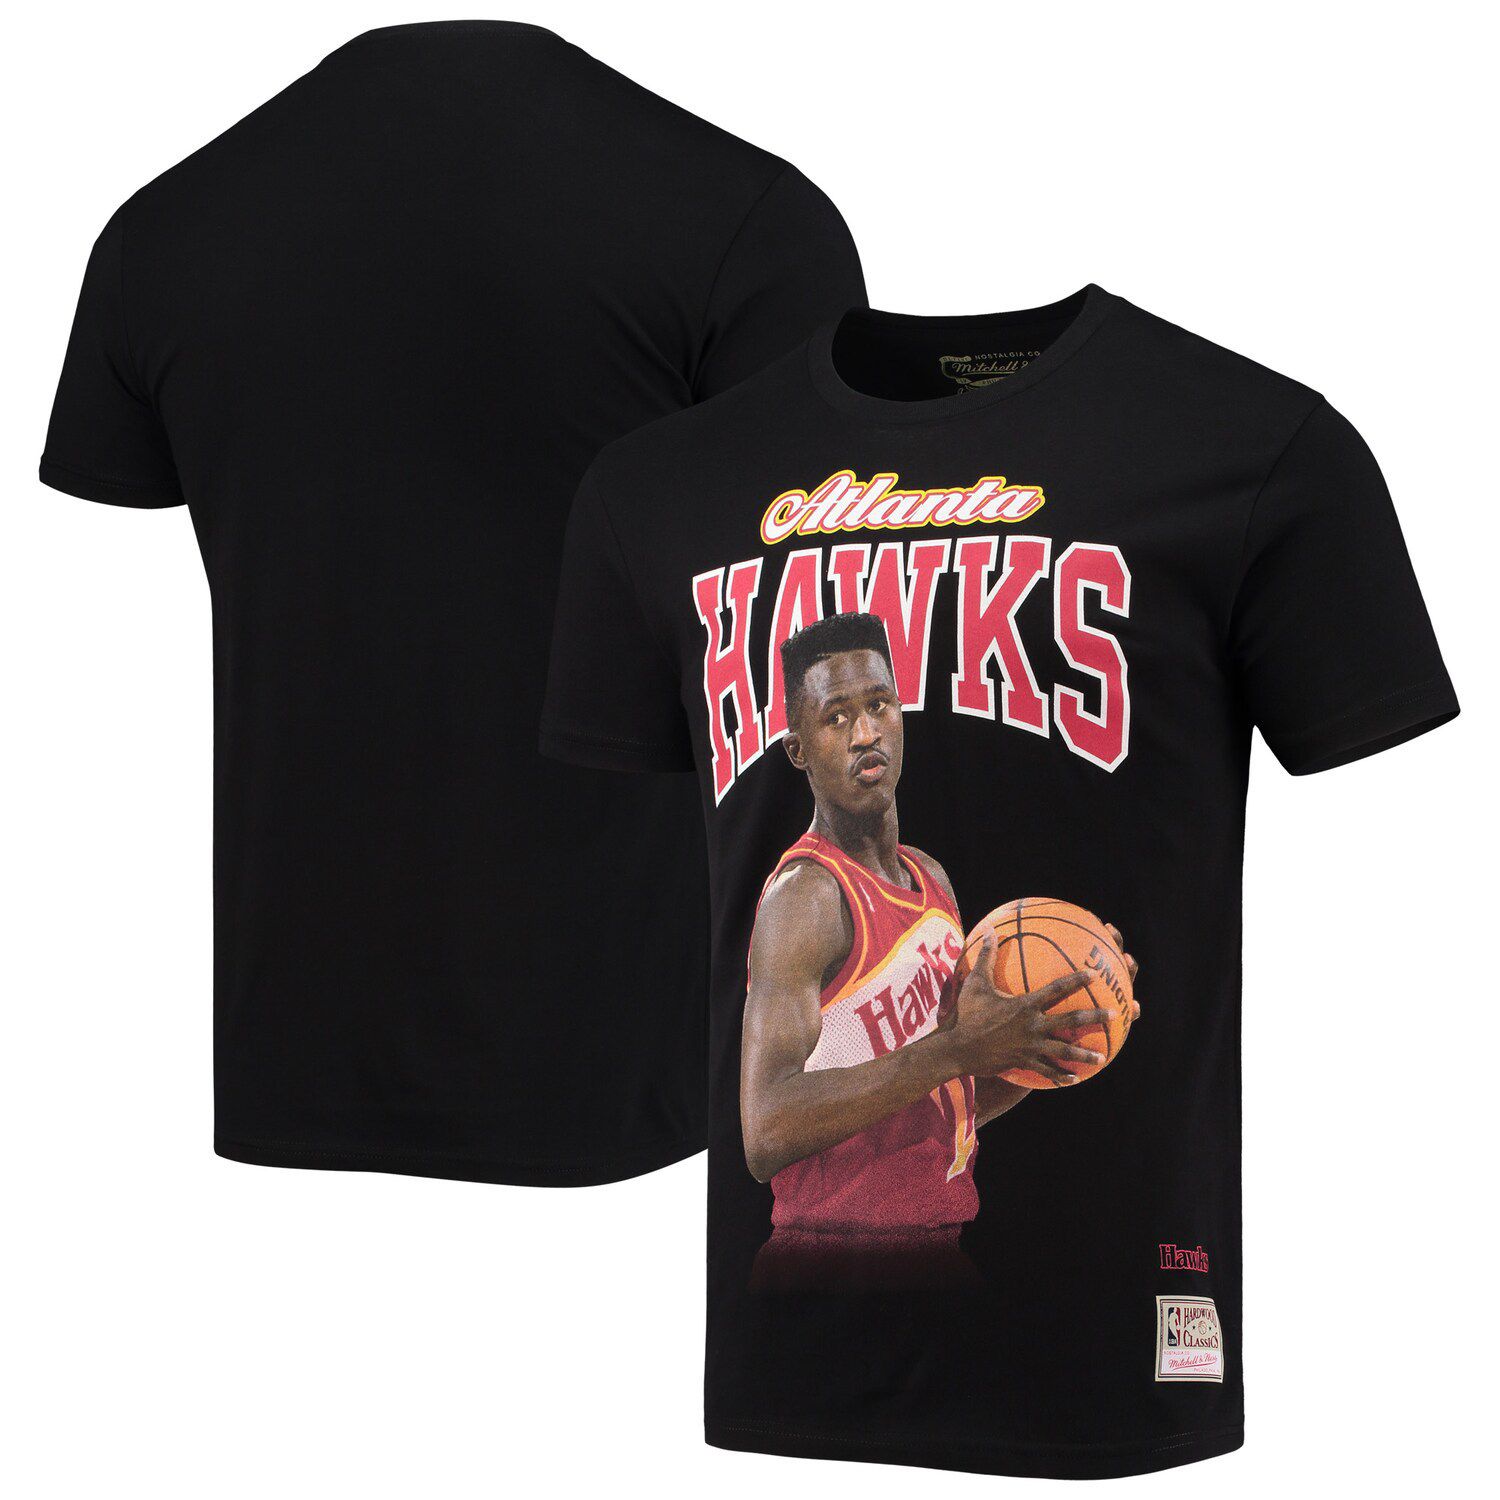 Image for Unbranded Men's Mitchell & Ness Dominique Wilkins Black Atlanta Hawks Hardwood Classics Courtside Player T-Shirt at Kohl's.